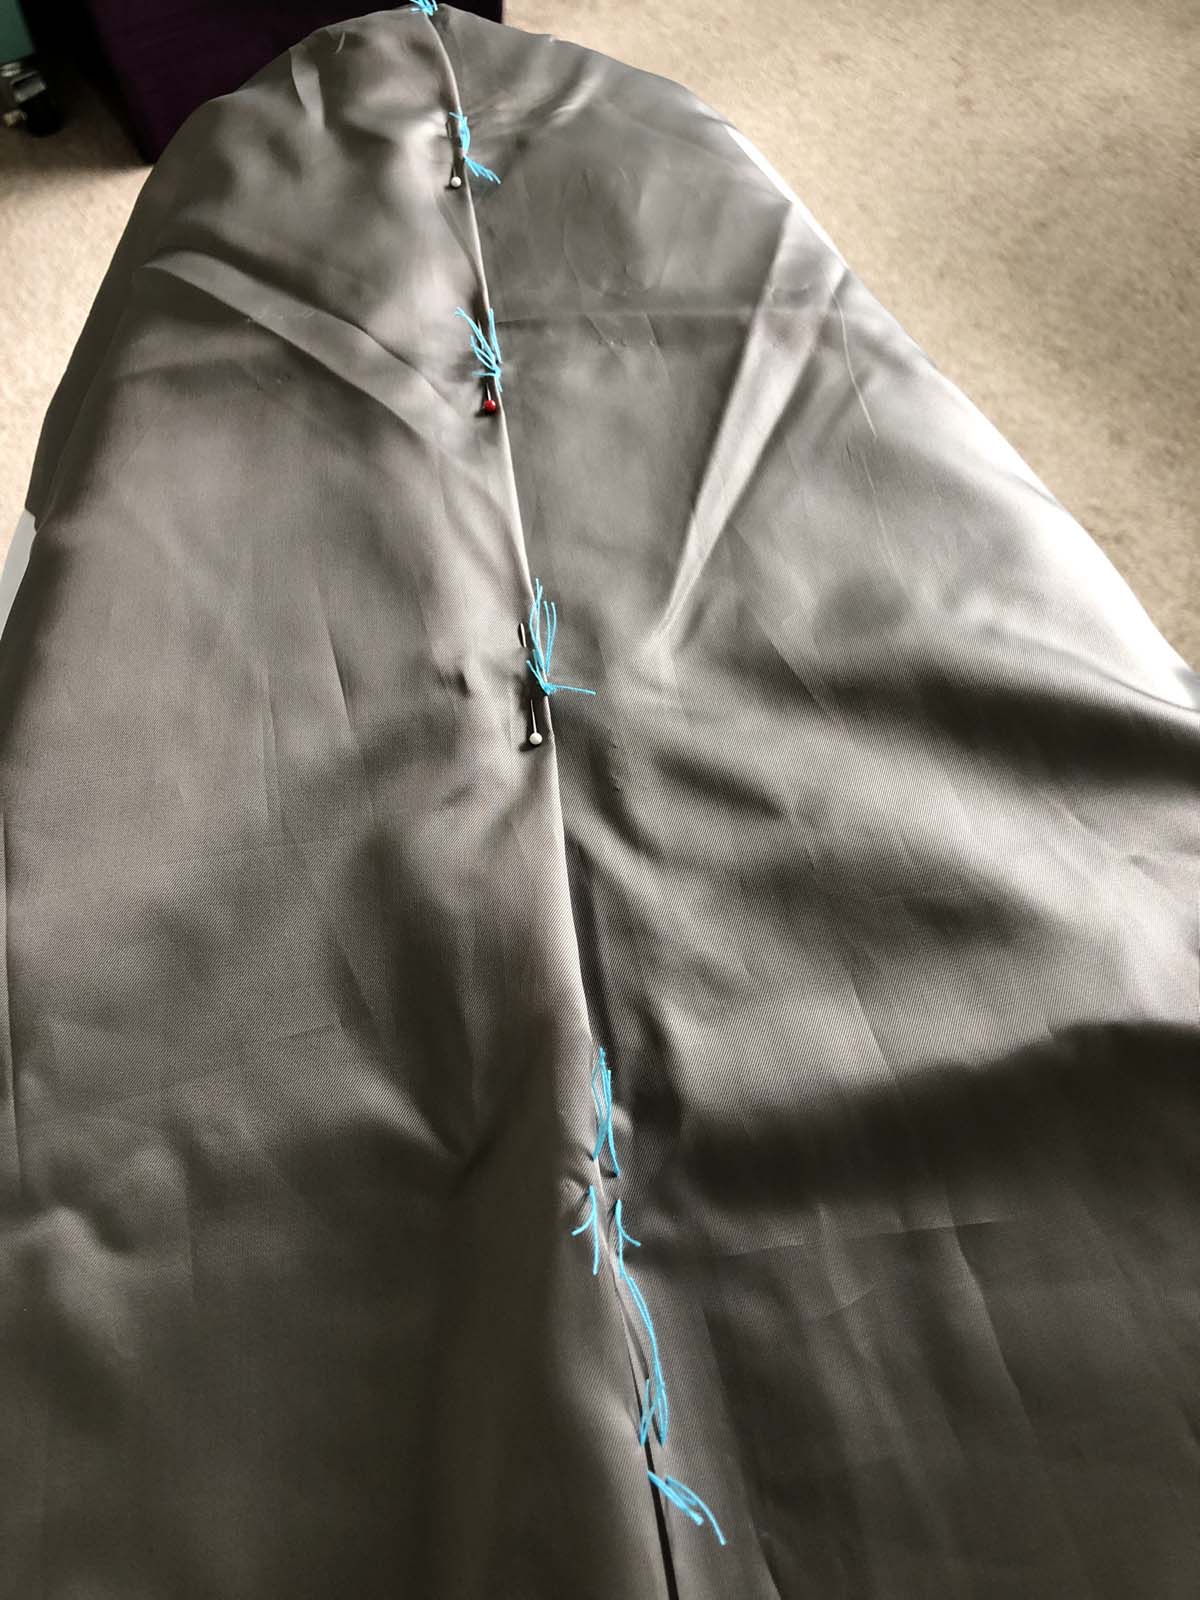 tailor's tacks on the back lining